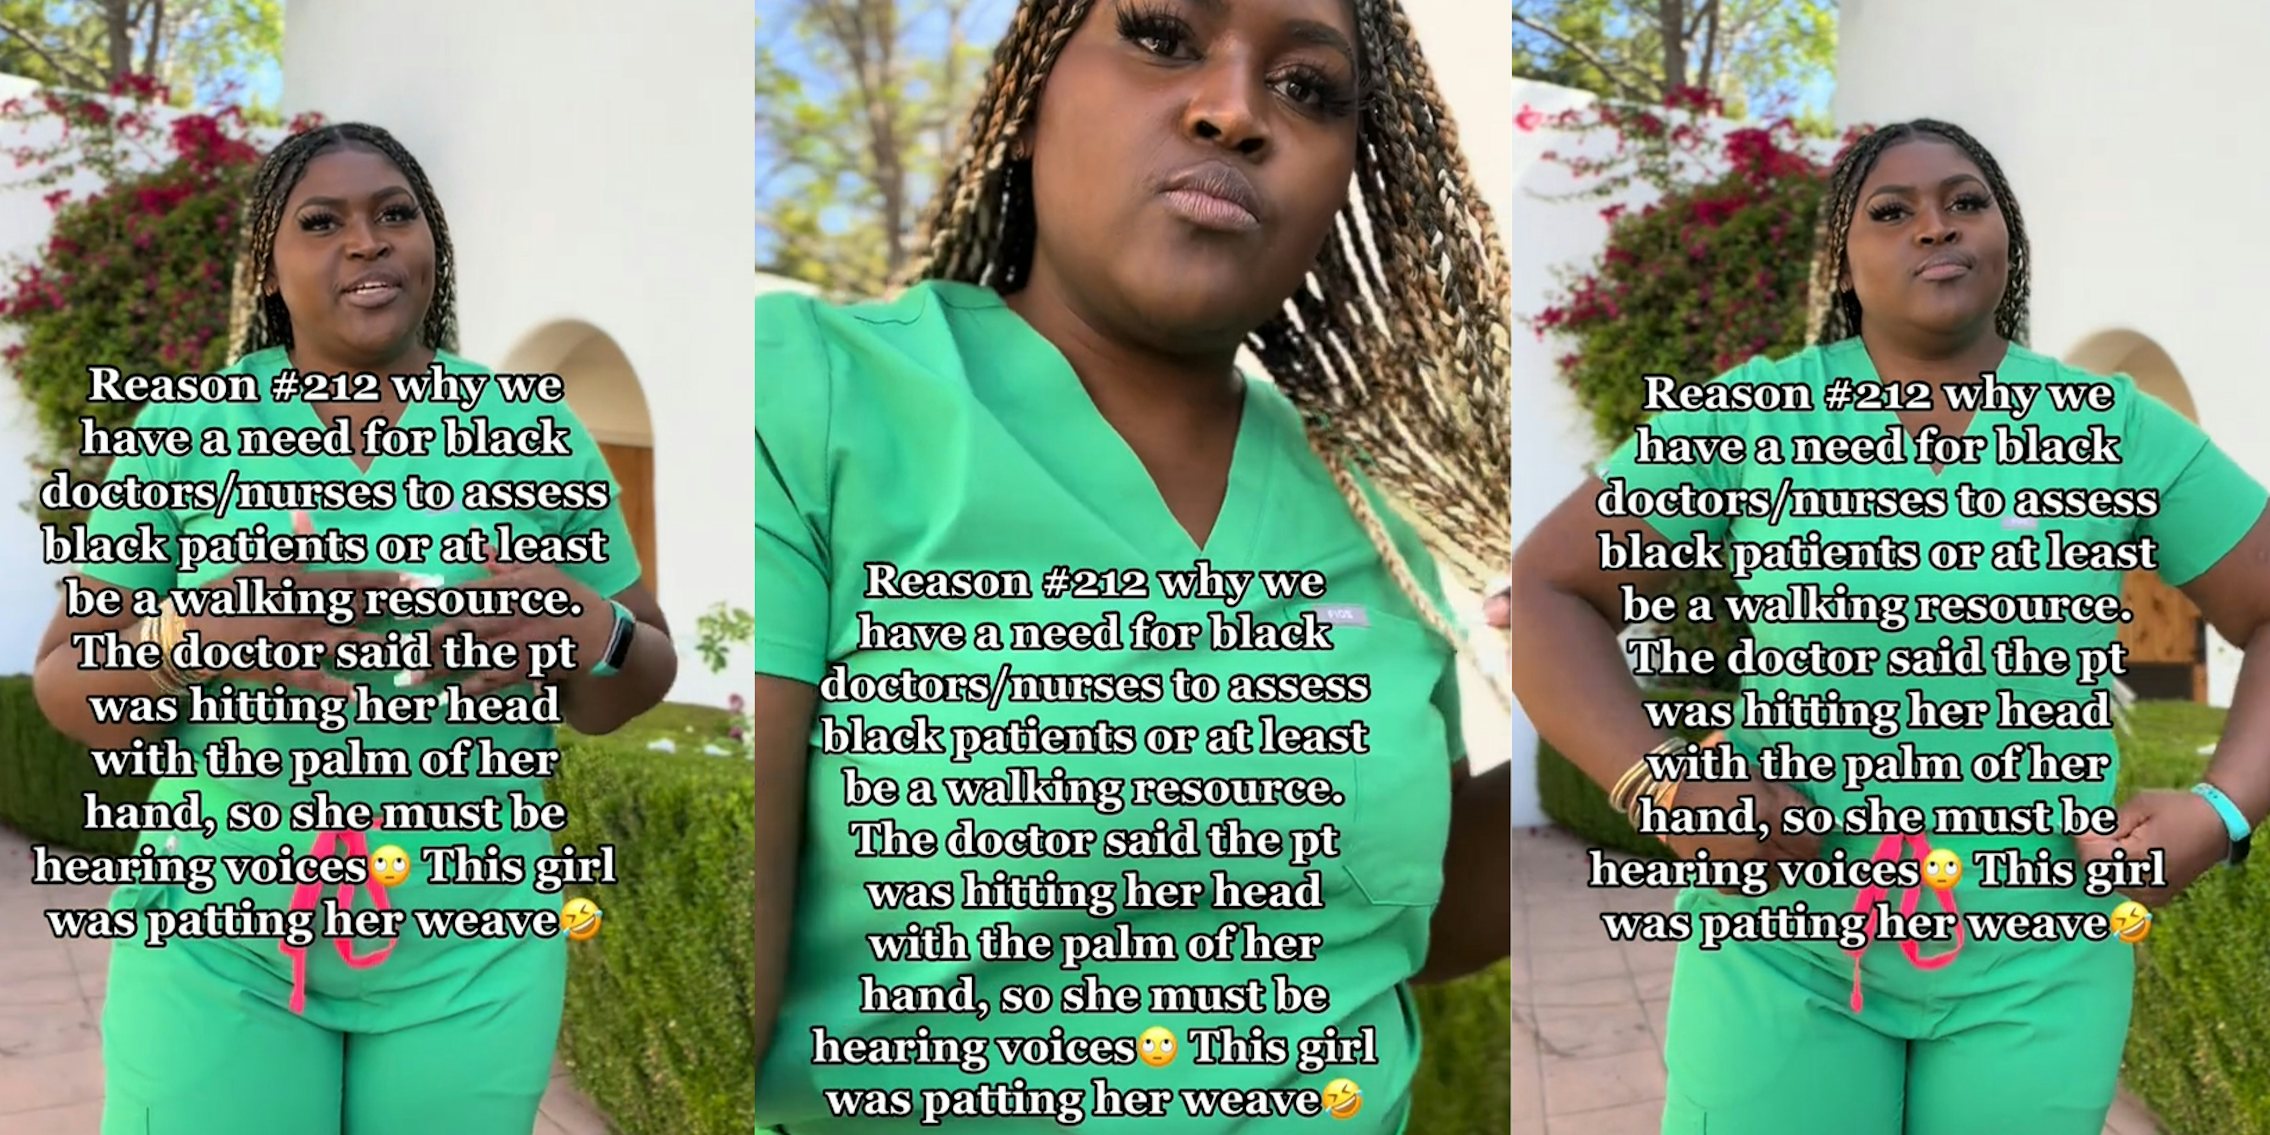 doctor thinks Black patient is hearing voices—she was patting her weave